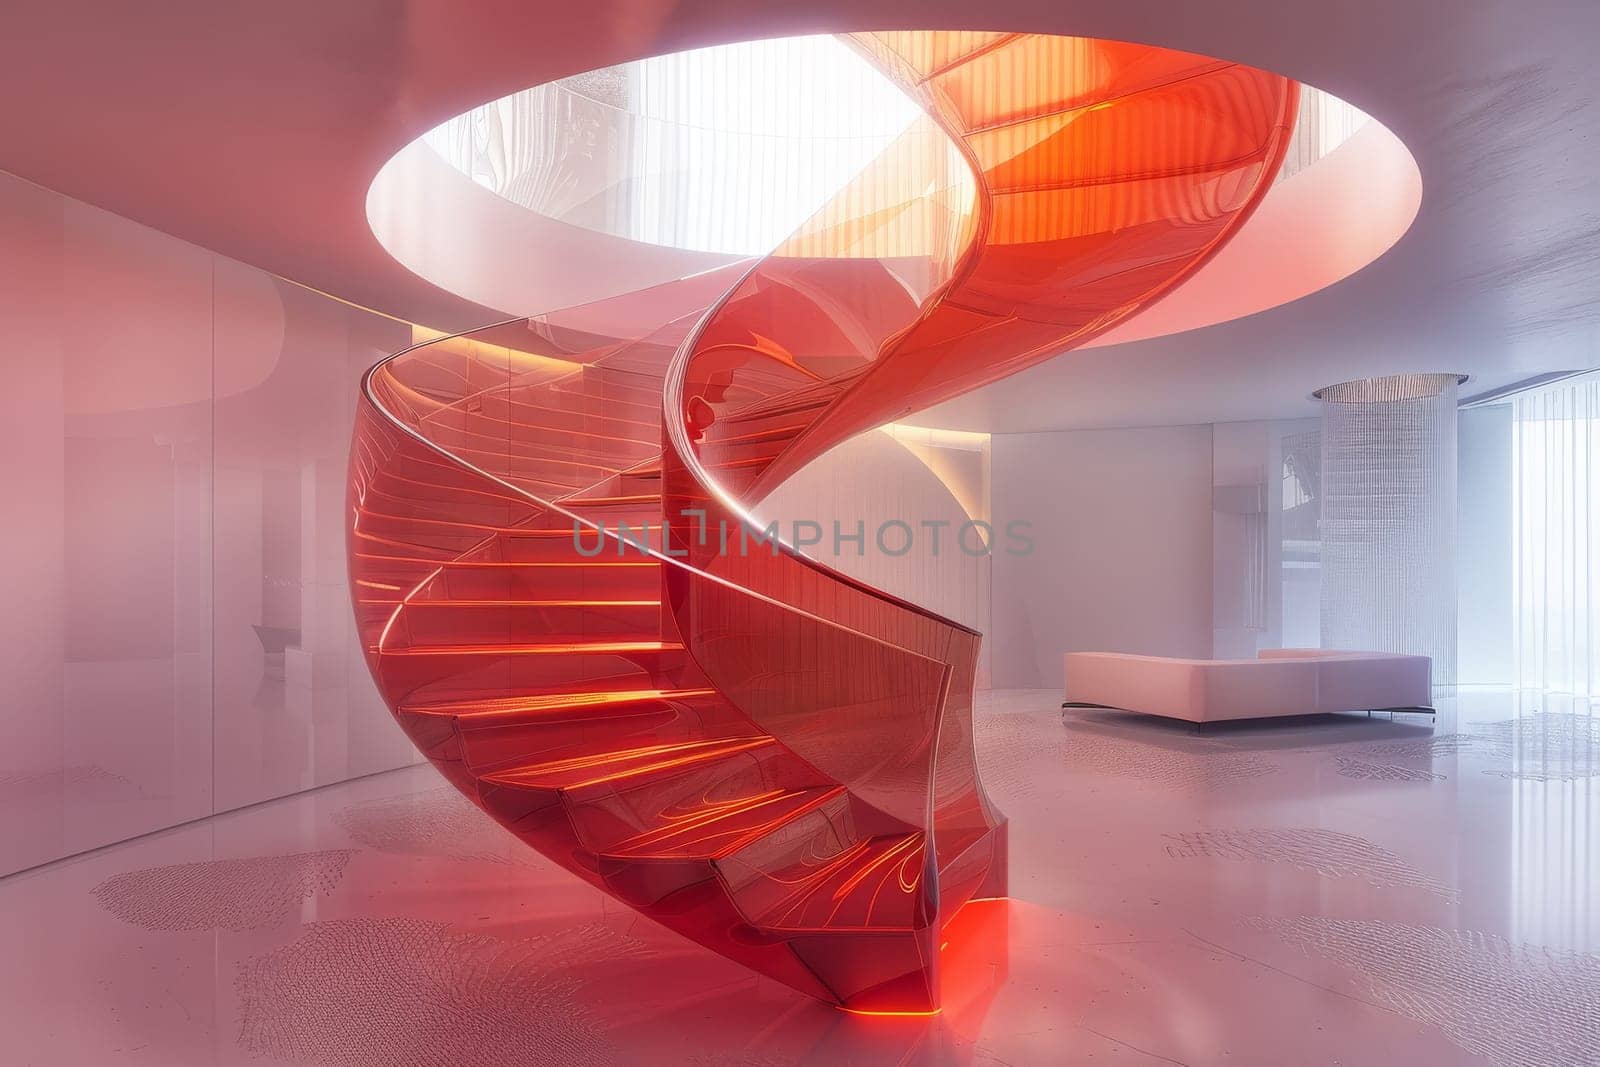 A spiral staircase with red steps is lit up and is the focal point of the room. The staircase is surrounded by a white room with a bed and a couch